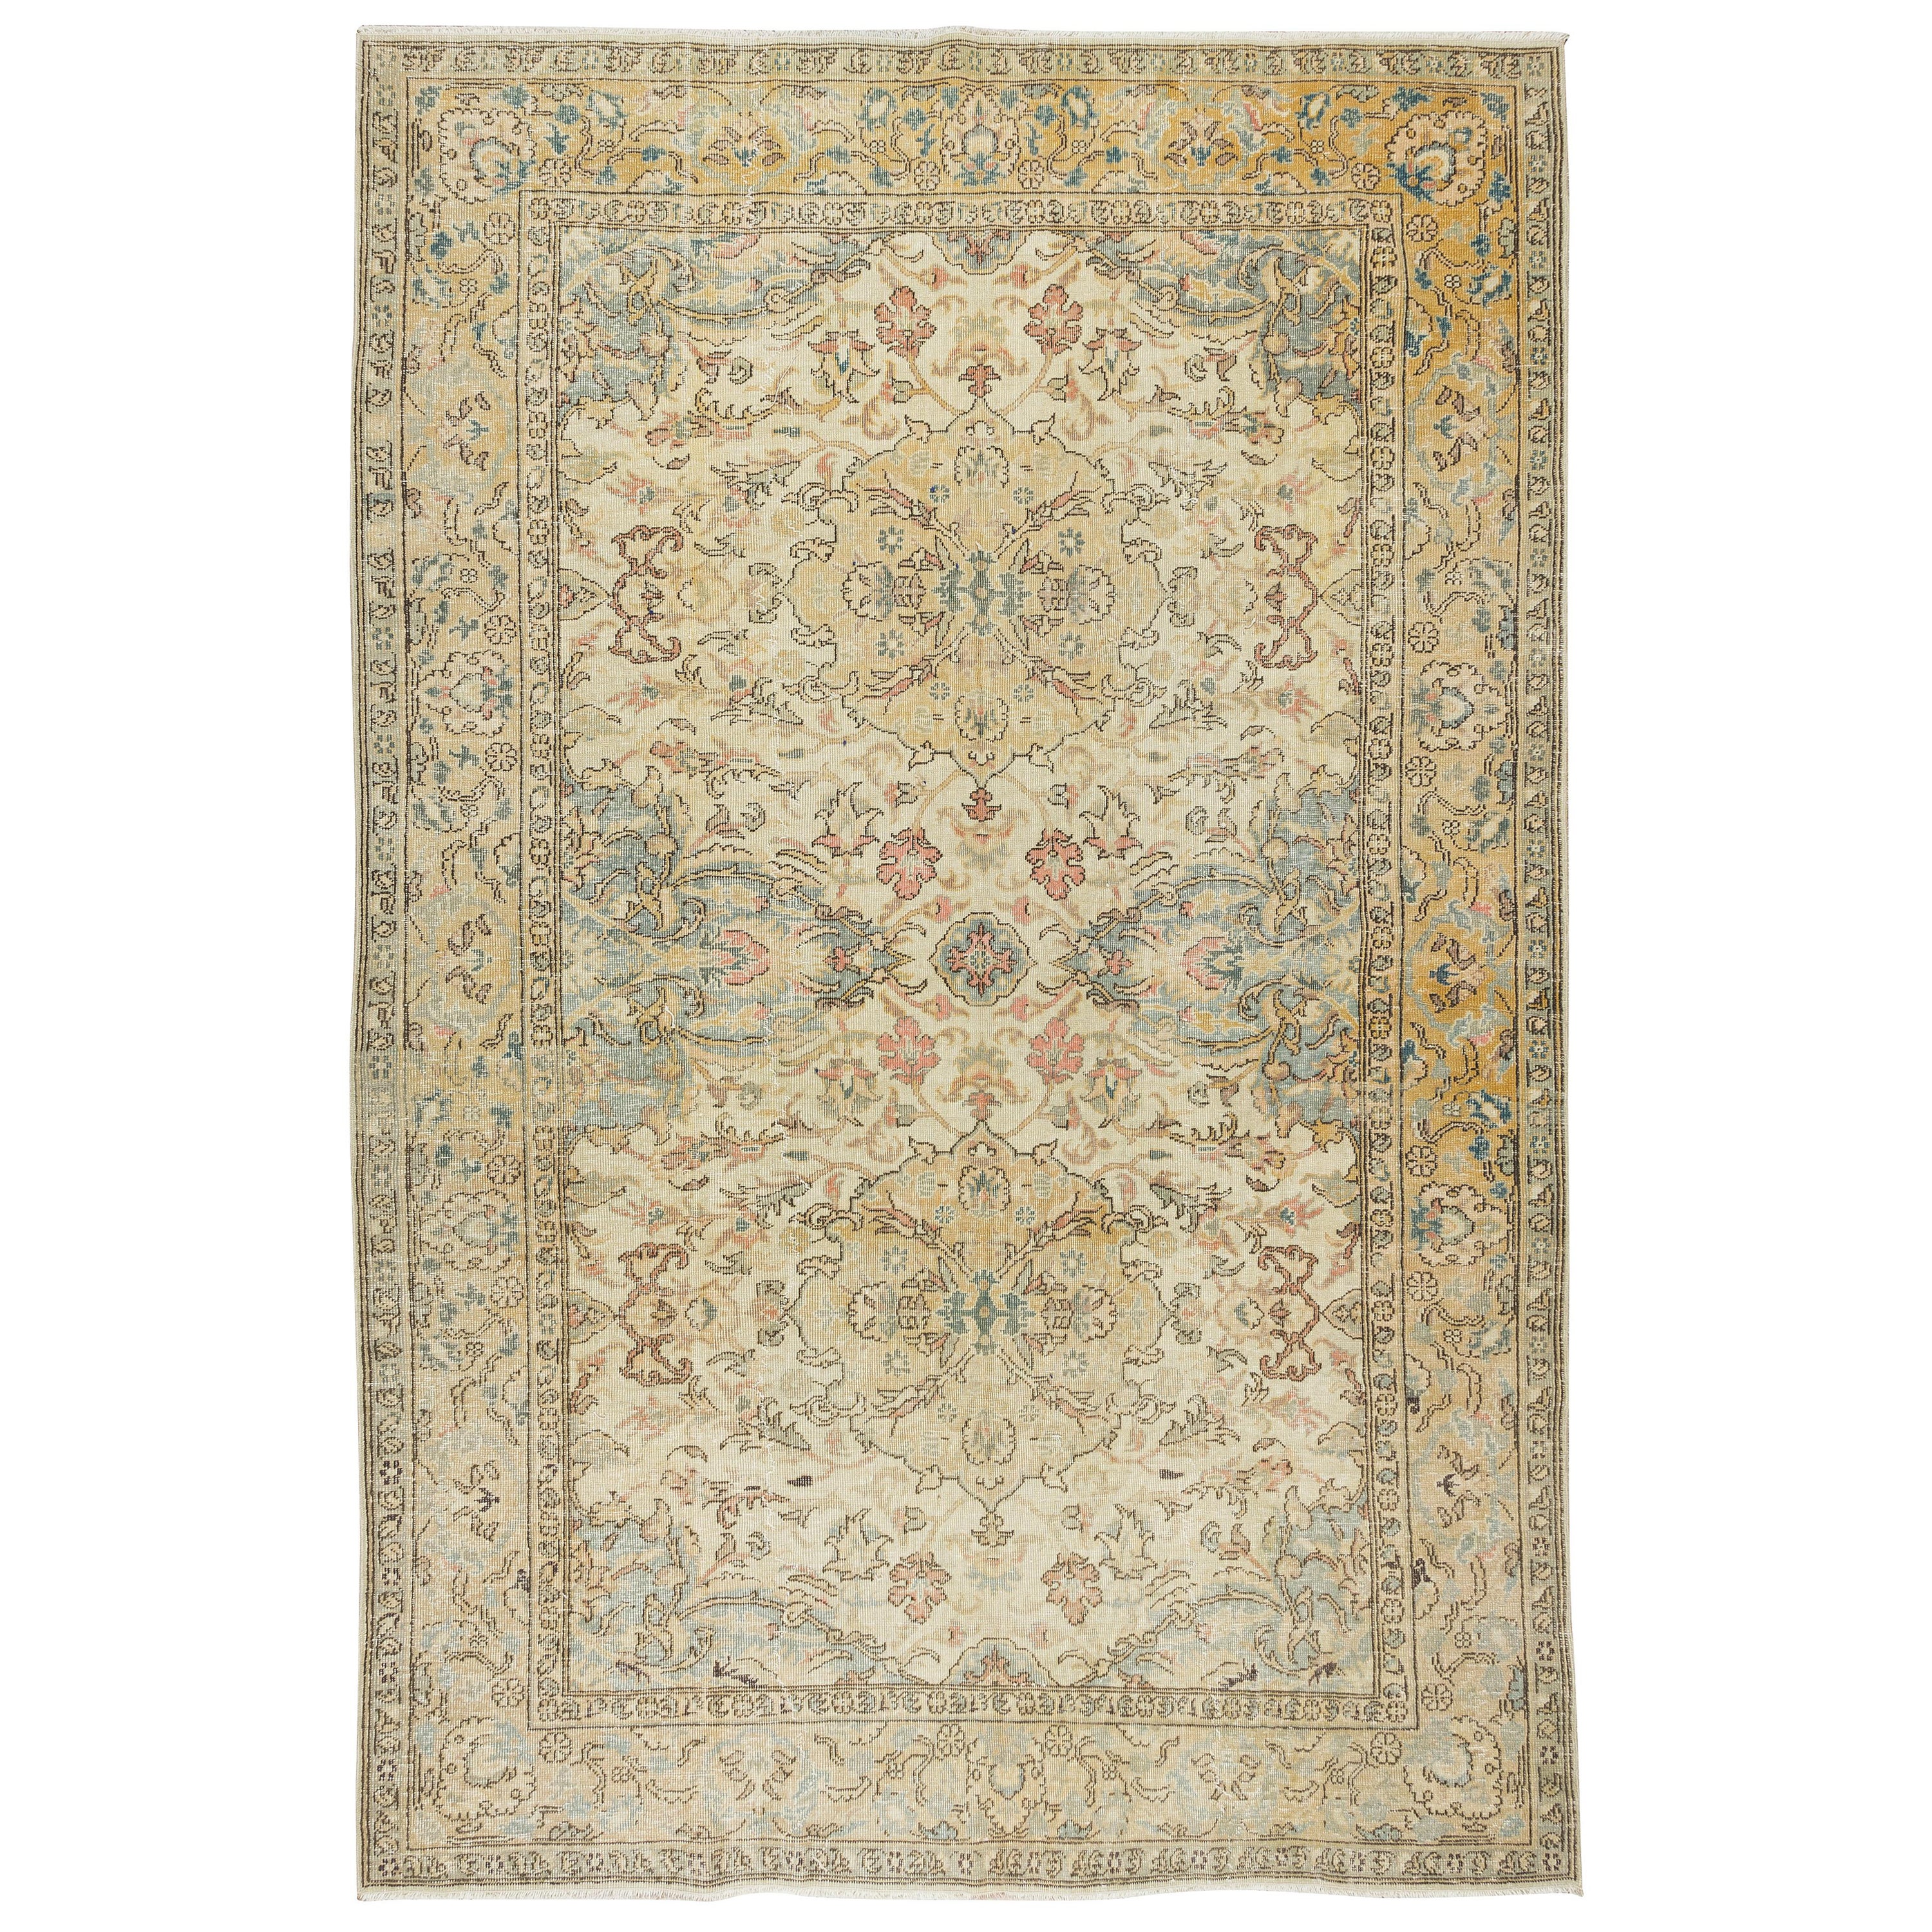 6.7x10.5 Ft Handmade Vintage Turkish Rug in Beige, Ideal for Home & Office Decor For Sale